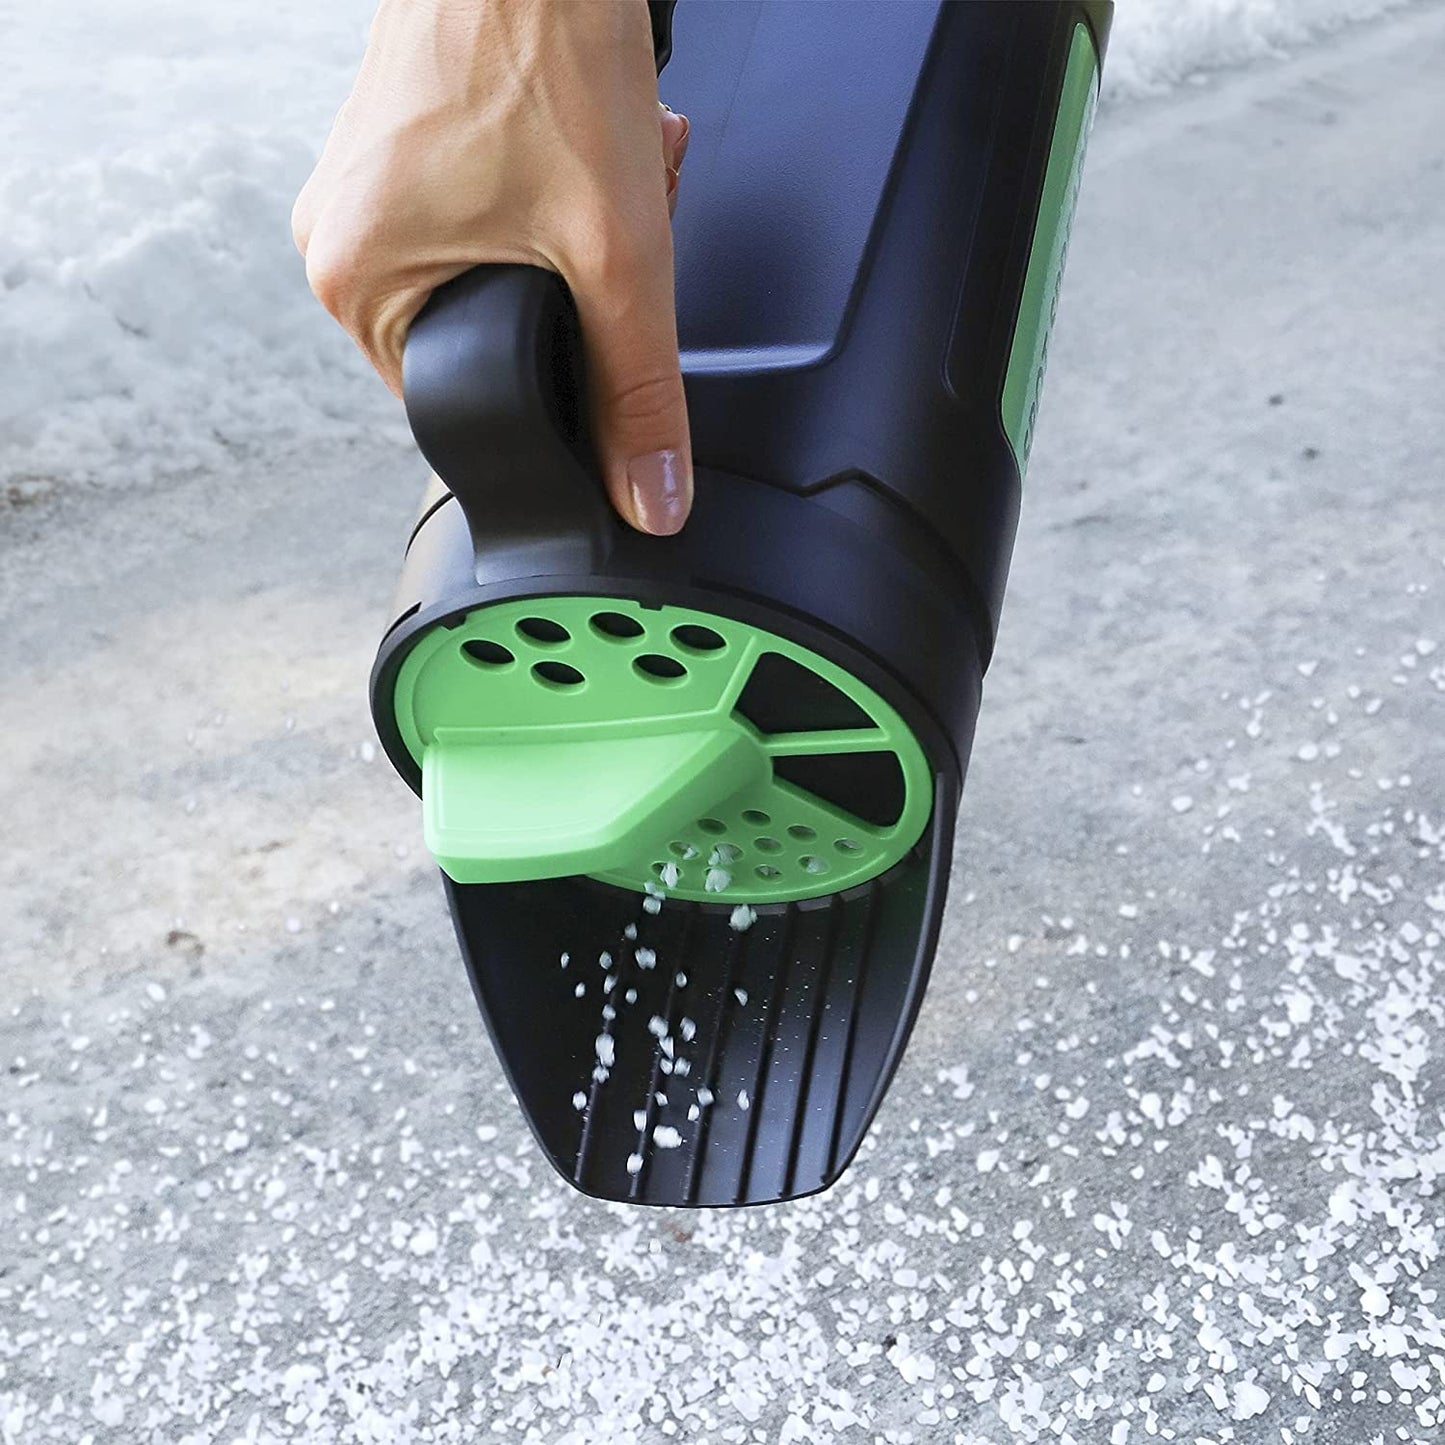 Hand Spreader Shaker for Seed, Salt, De-Icer, Ice Melt, Earth Food and Fertilizer - Multiple Opening Sizes for Any Need - up to 80 Oz - Most Efficient & Sturdy Product on the Market